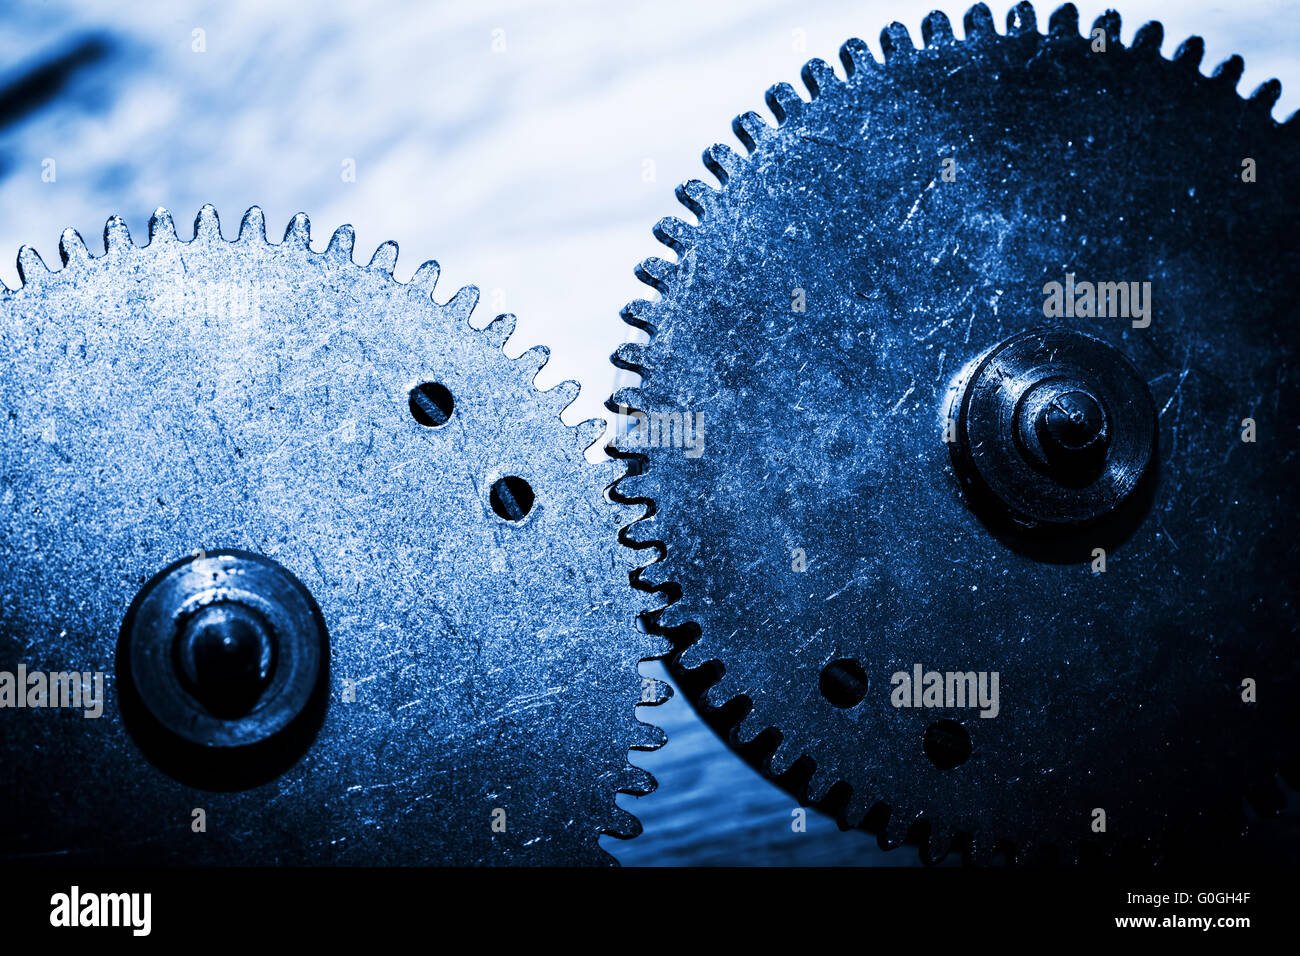 Grunge gear, cog wheels. Concept of industrial, science Stock Photo